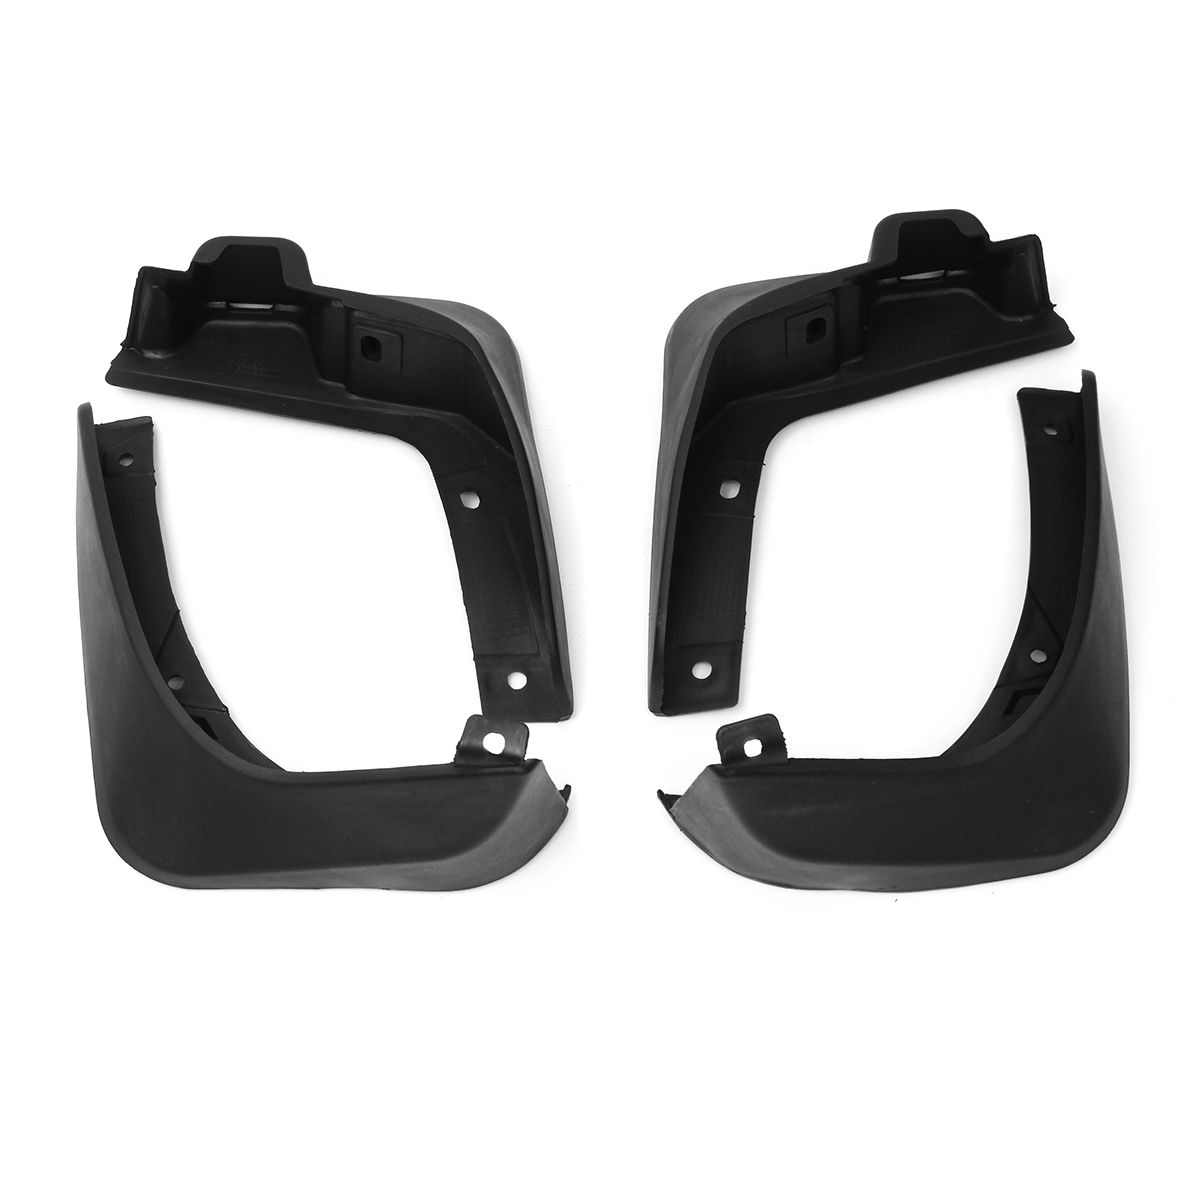 Front-And-Rear-Mud-Flaps-Car-Mudguards-For-Nissan-Micra-1388871